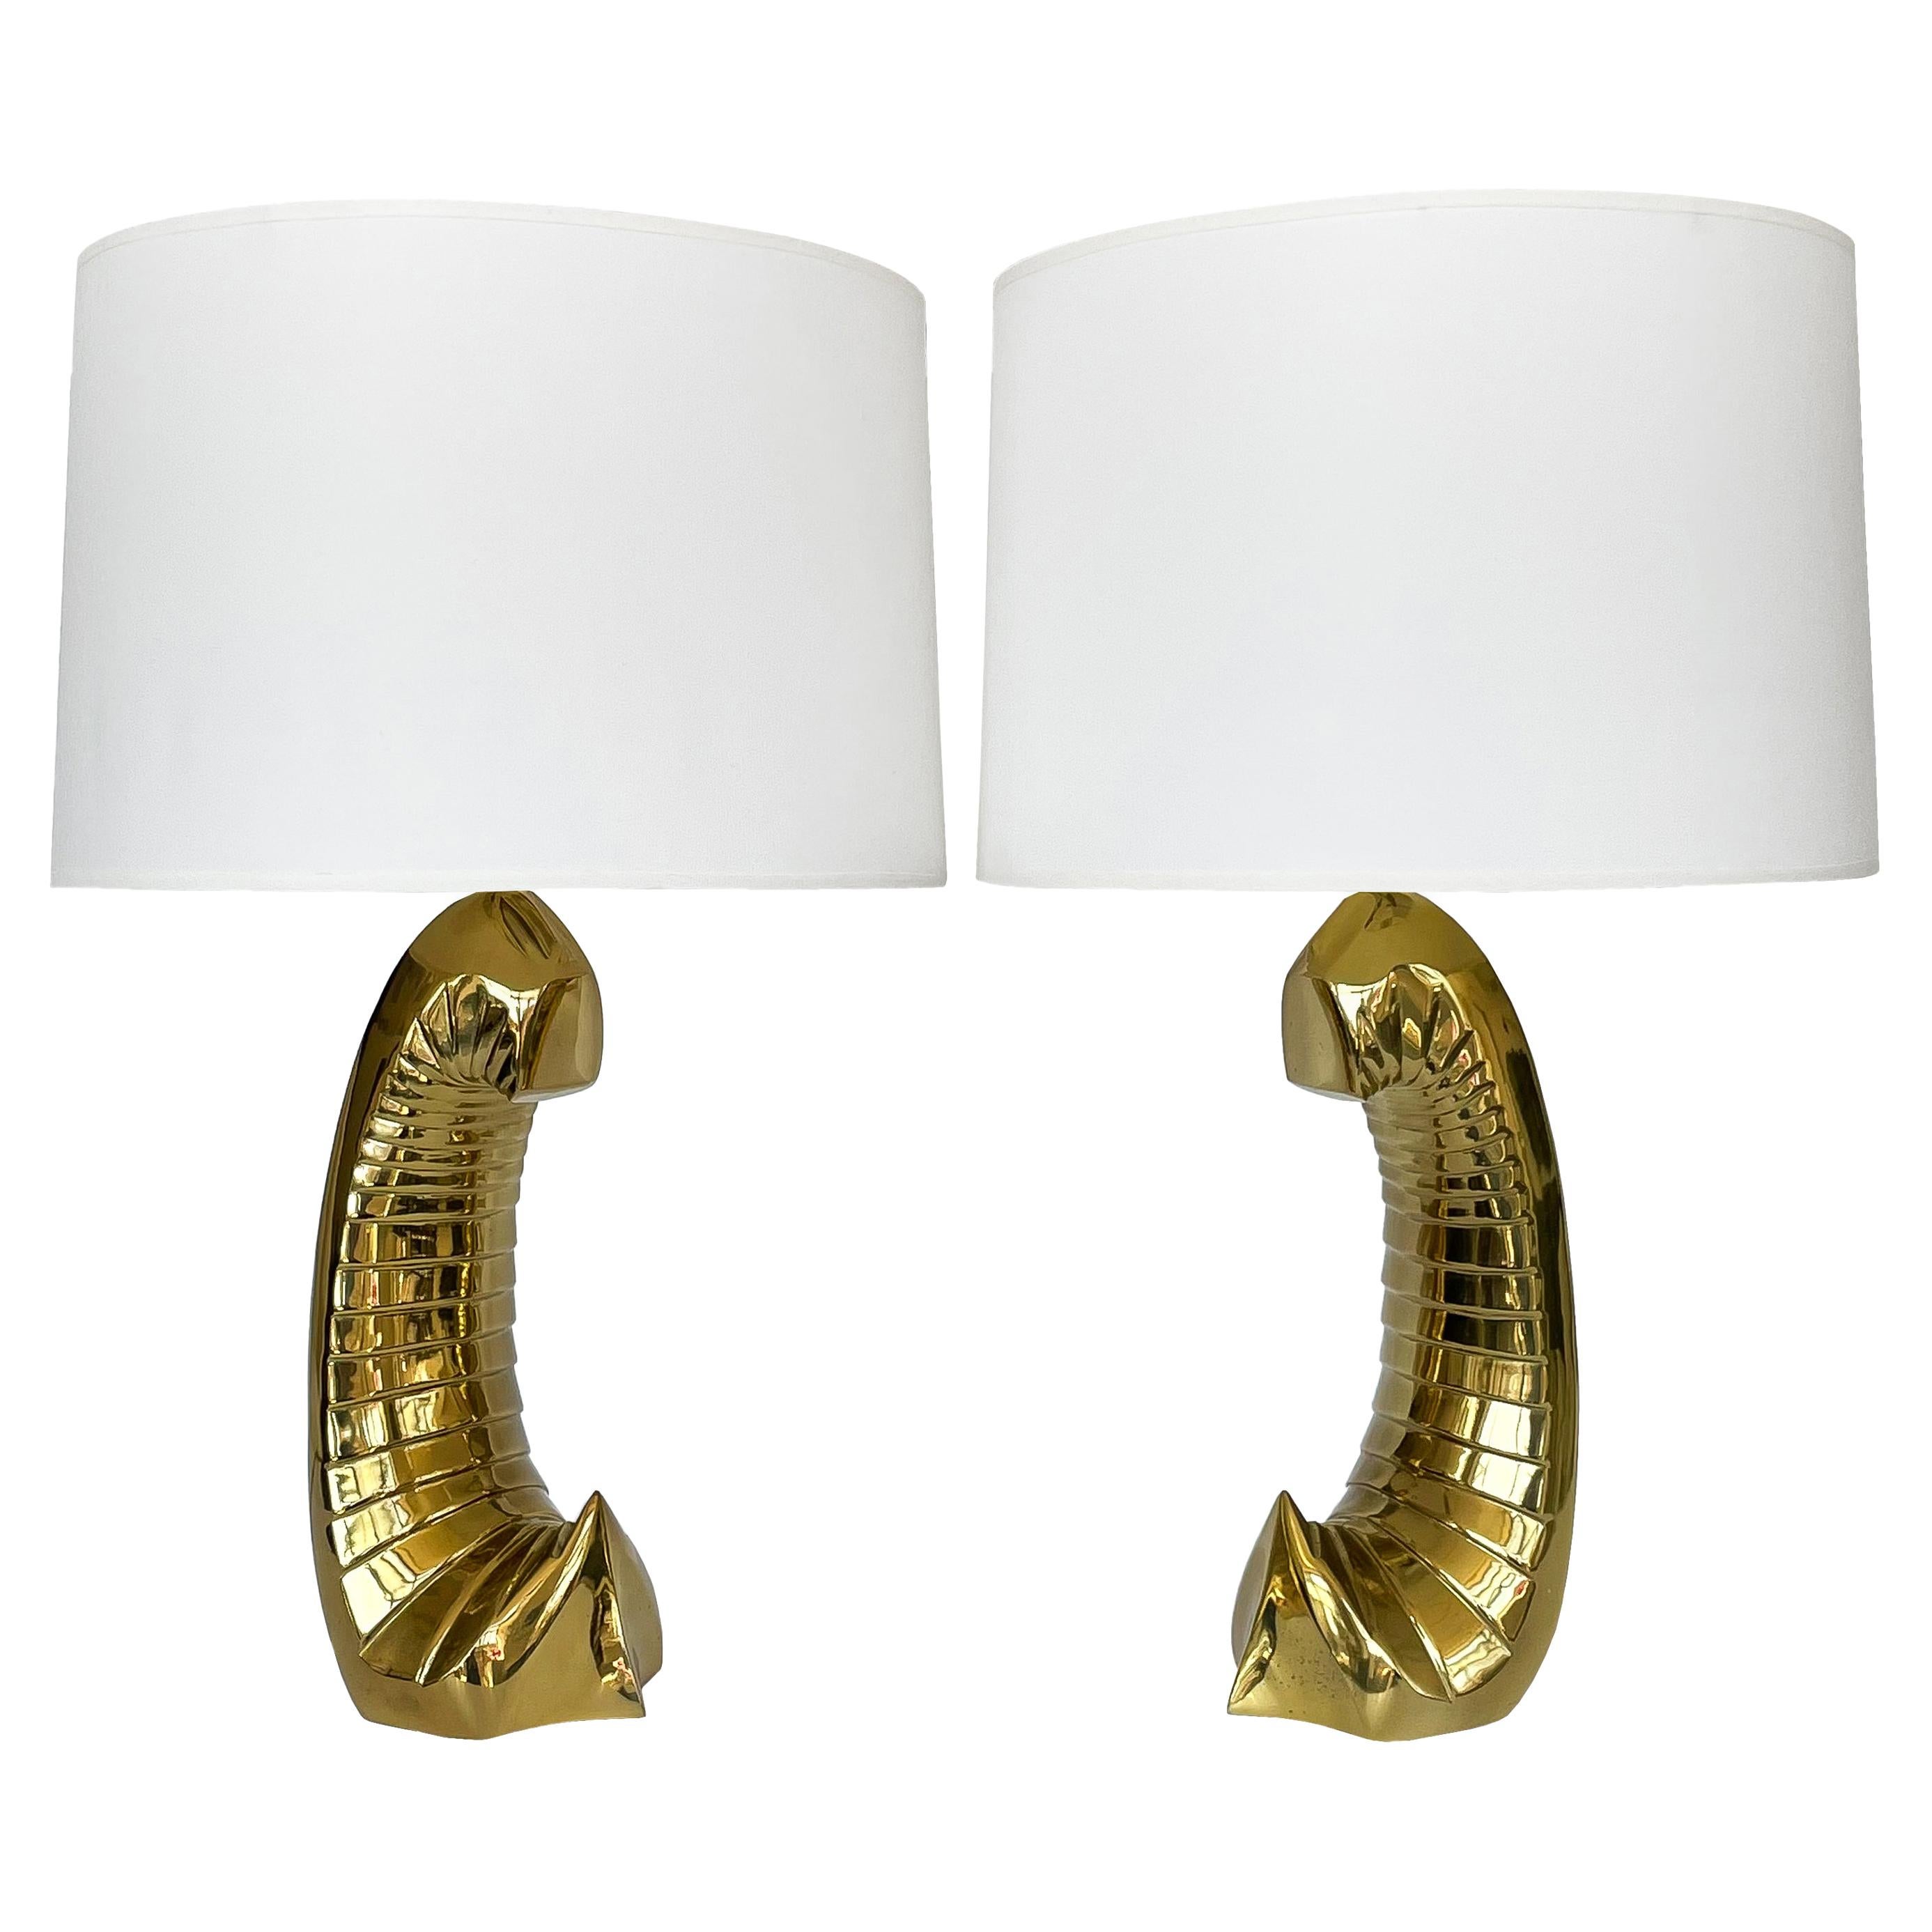 Pair of Sculptural Brass Table Lamps by Carl Falkenstein